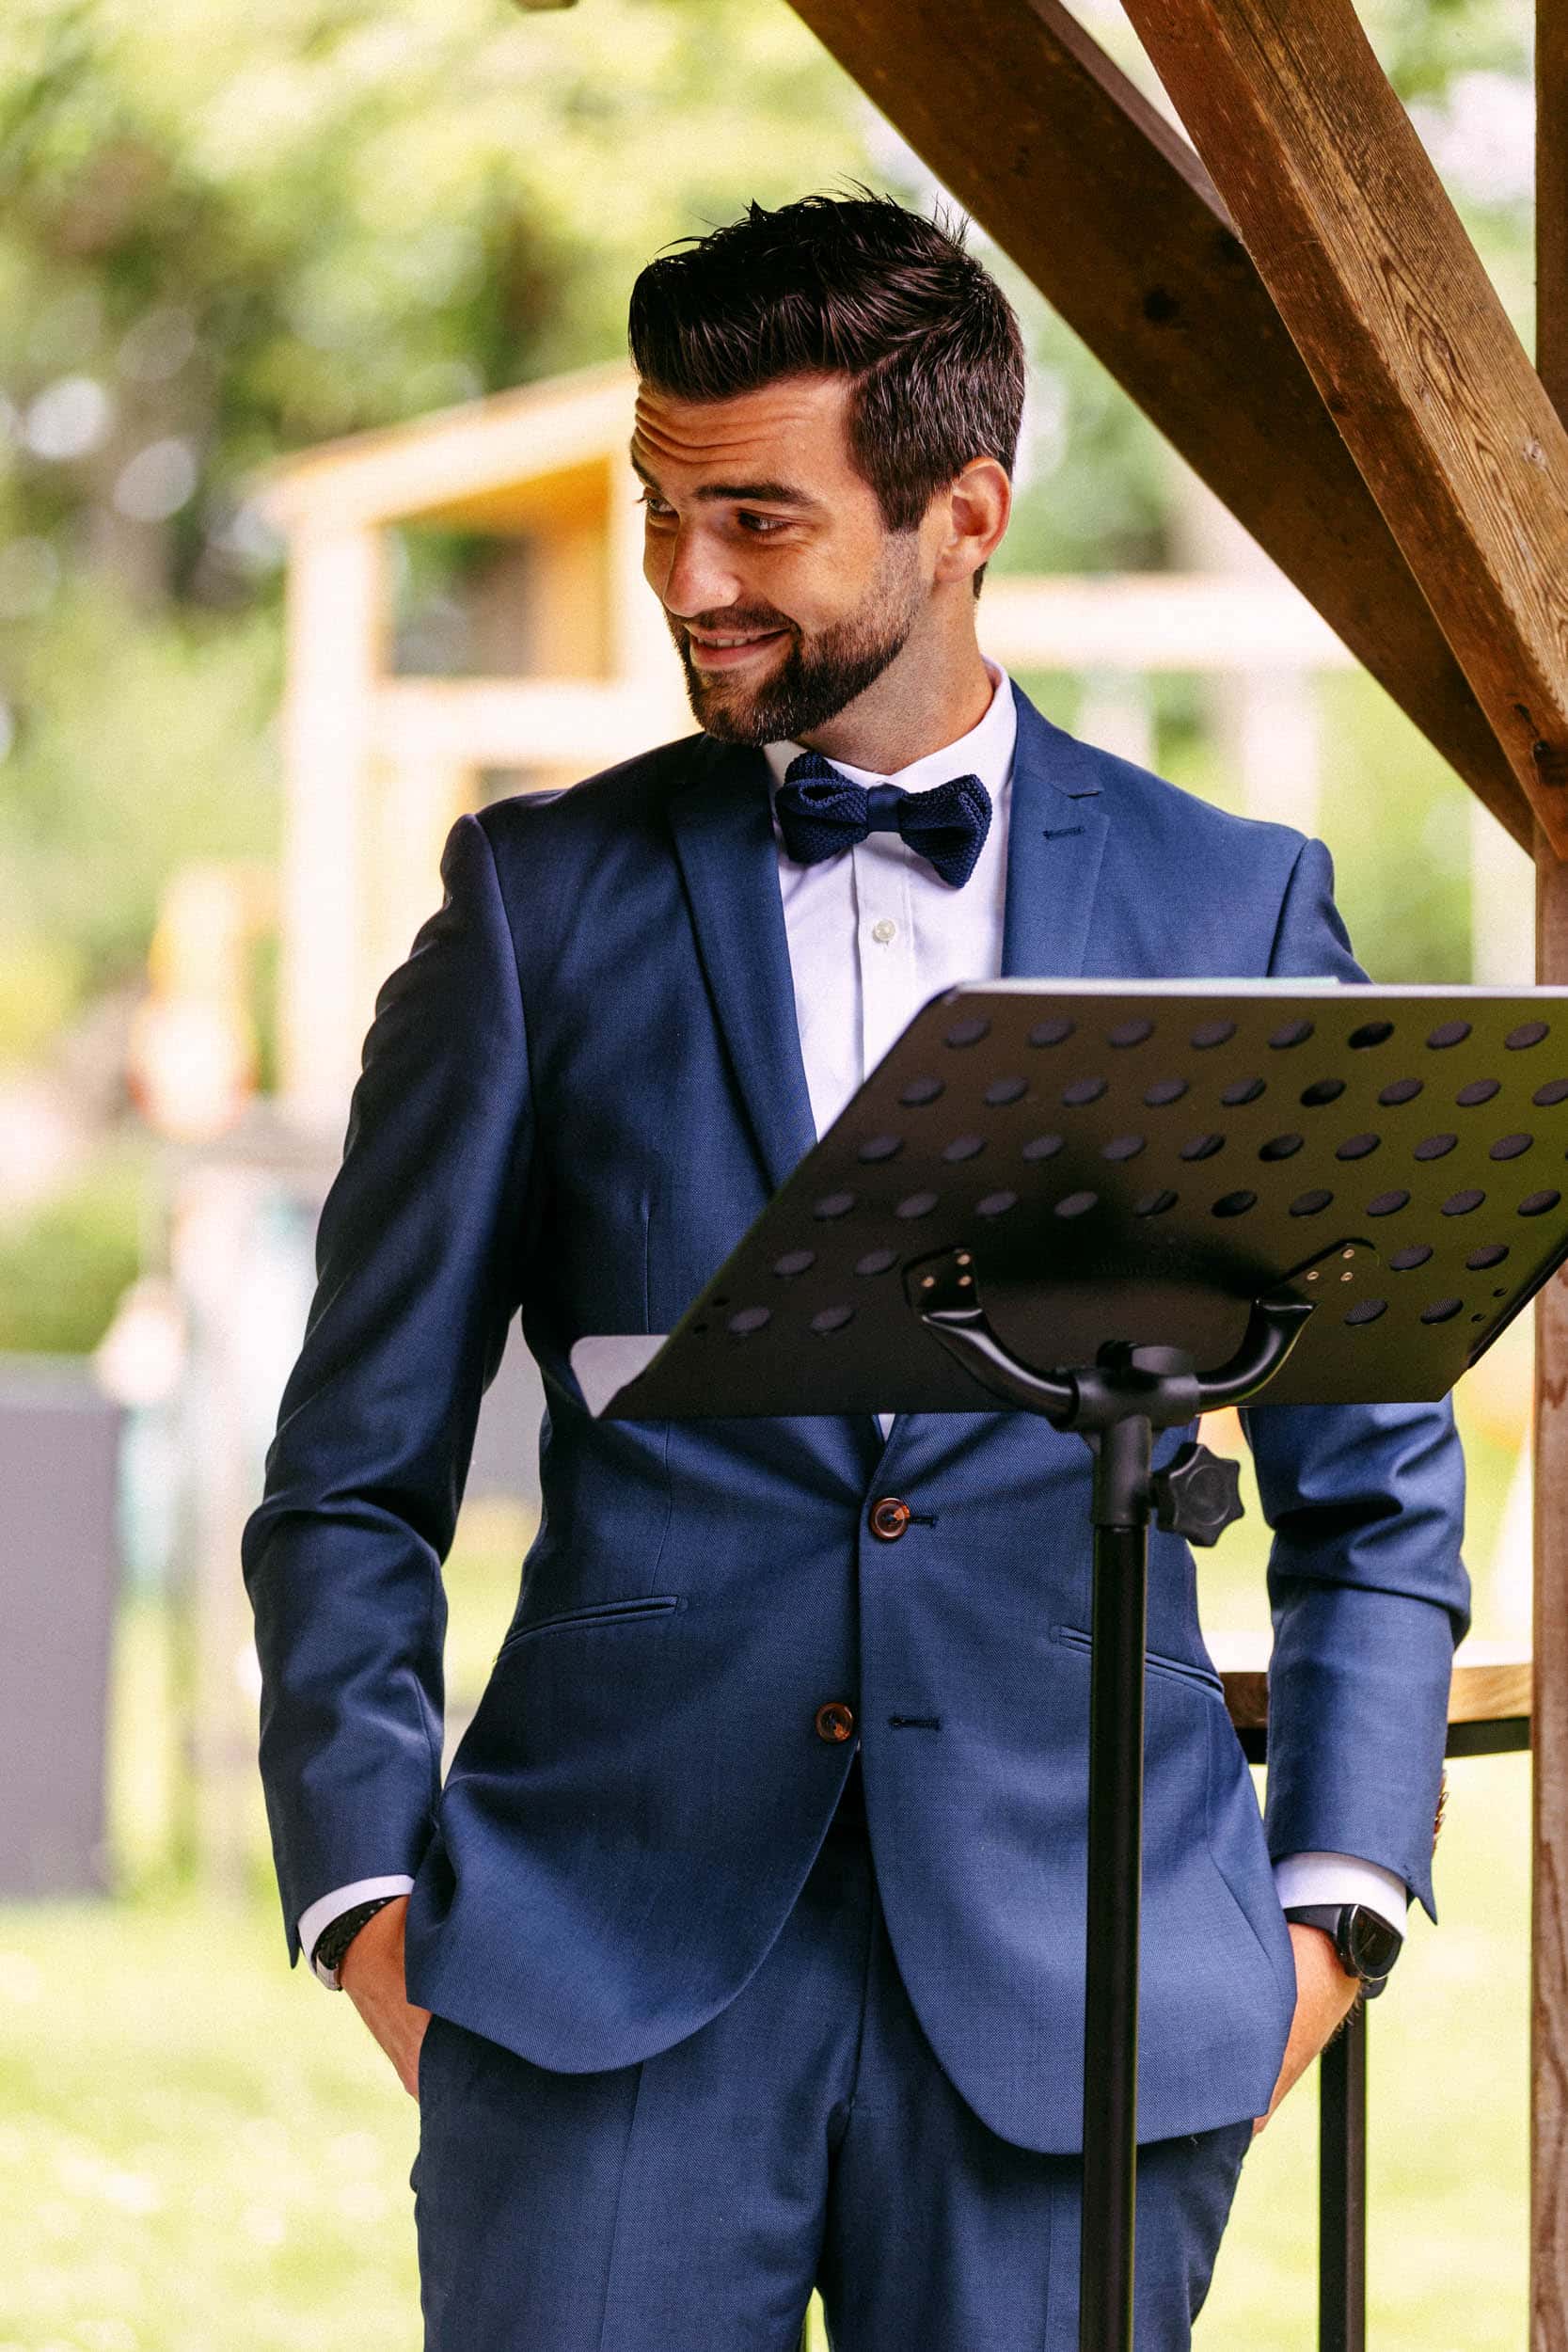 A man in a suit delivers a ready-made speech next to a music stand at a wedding.